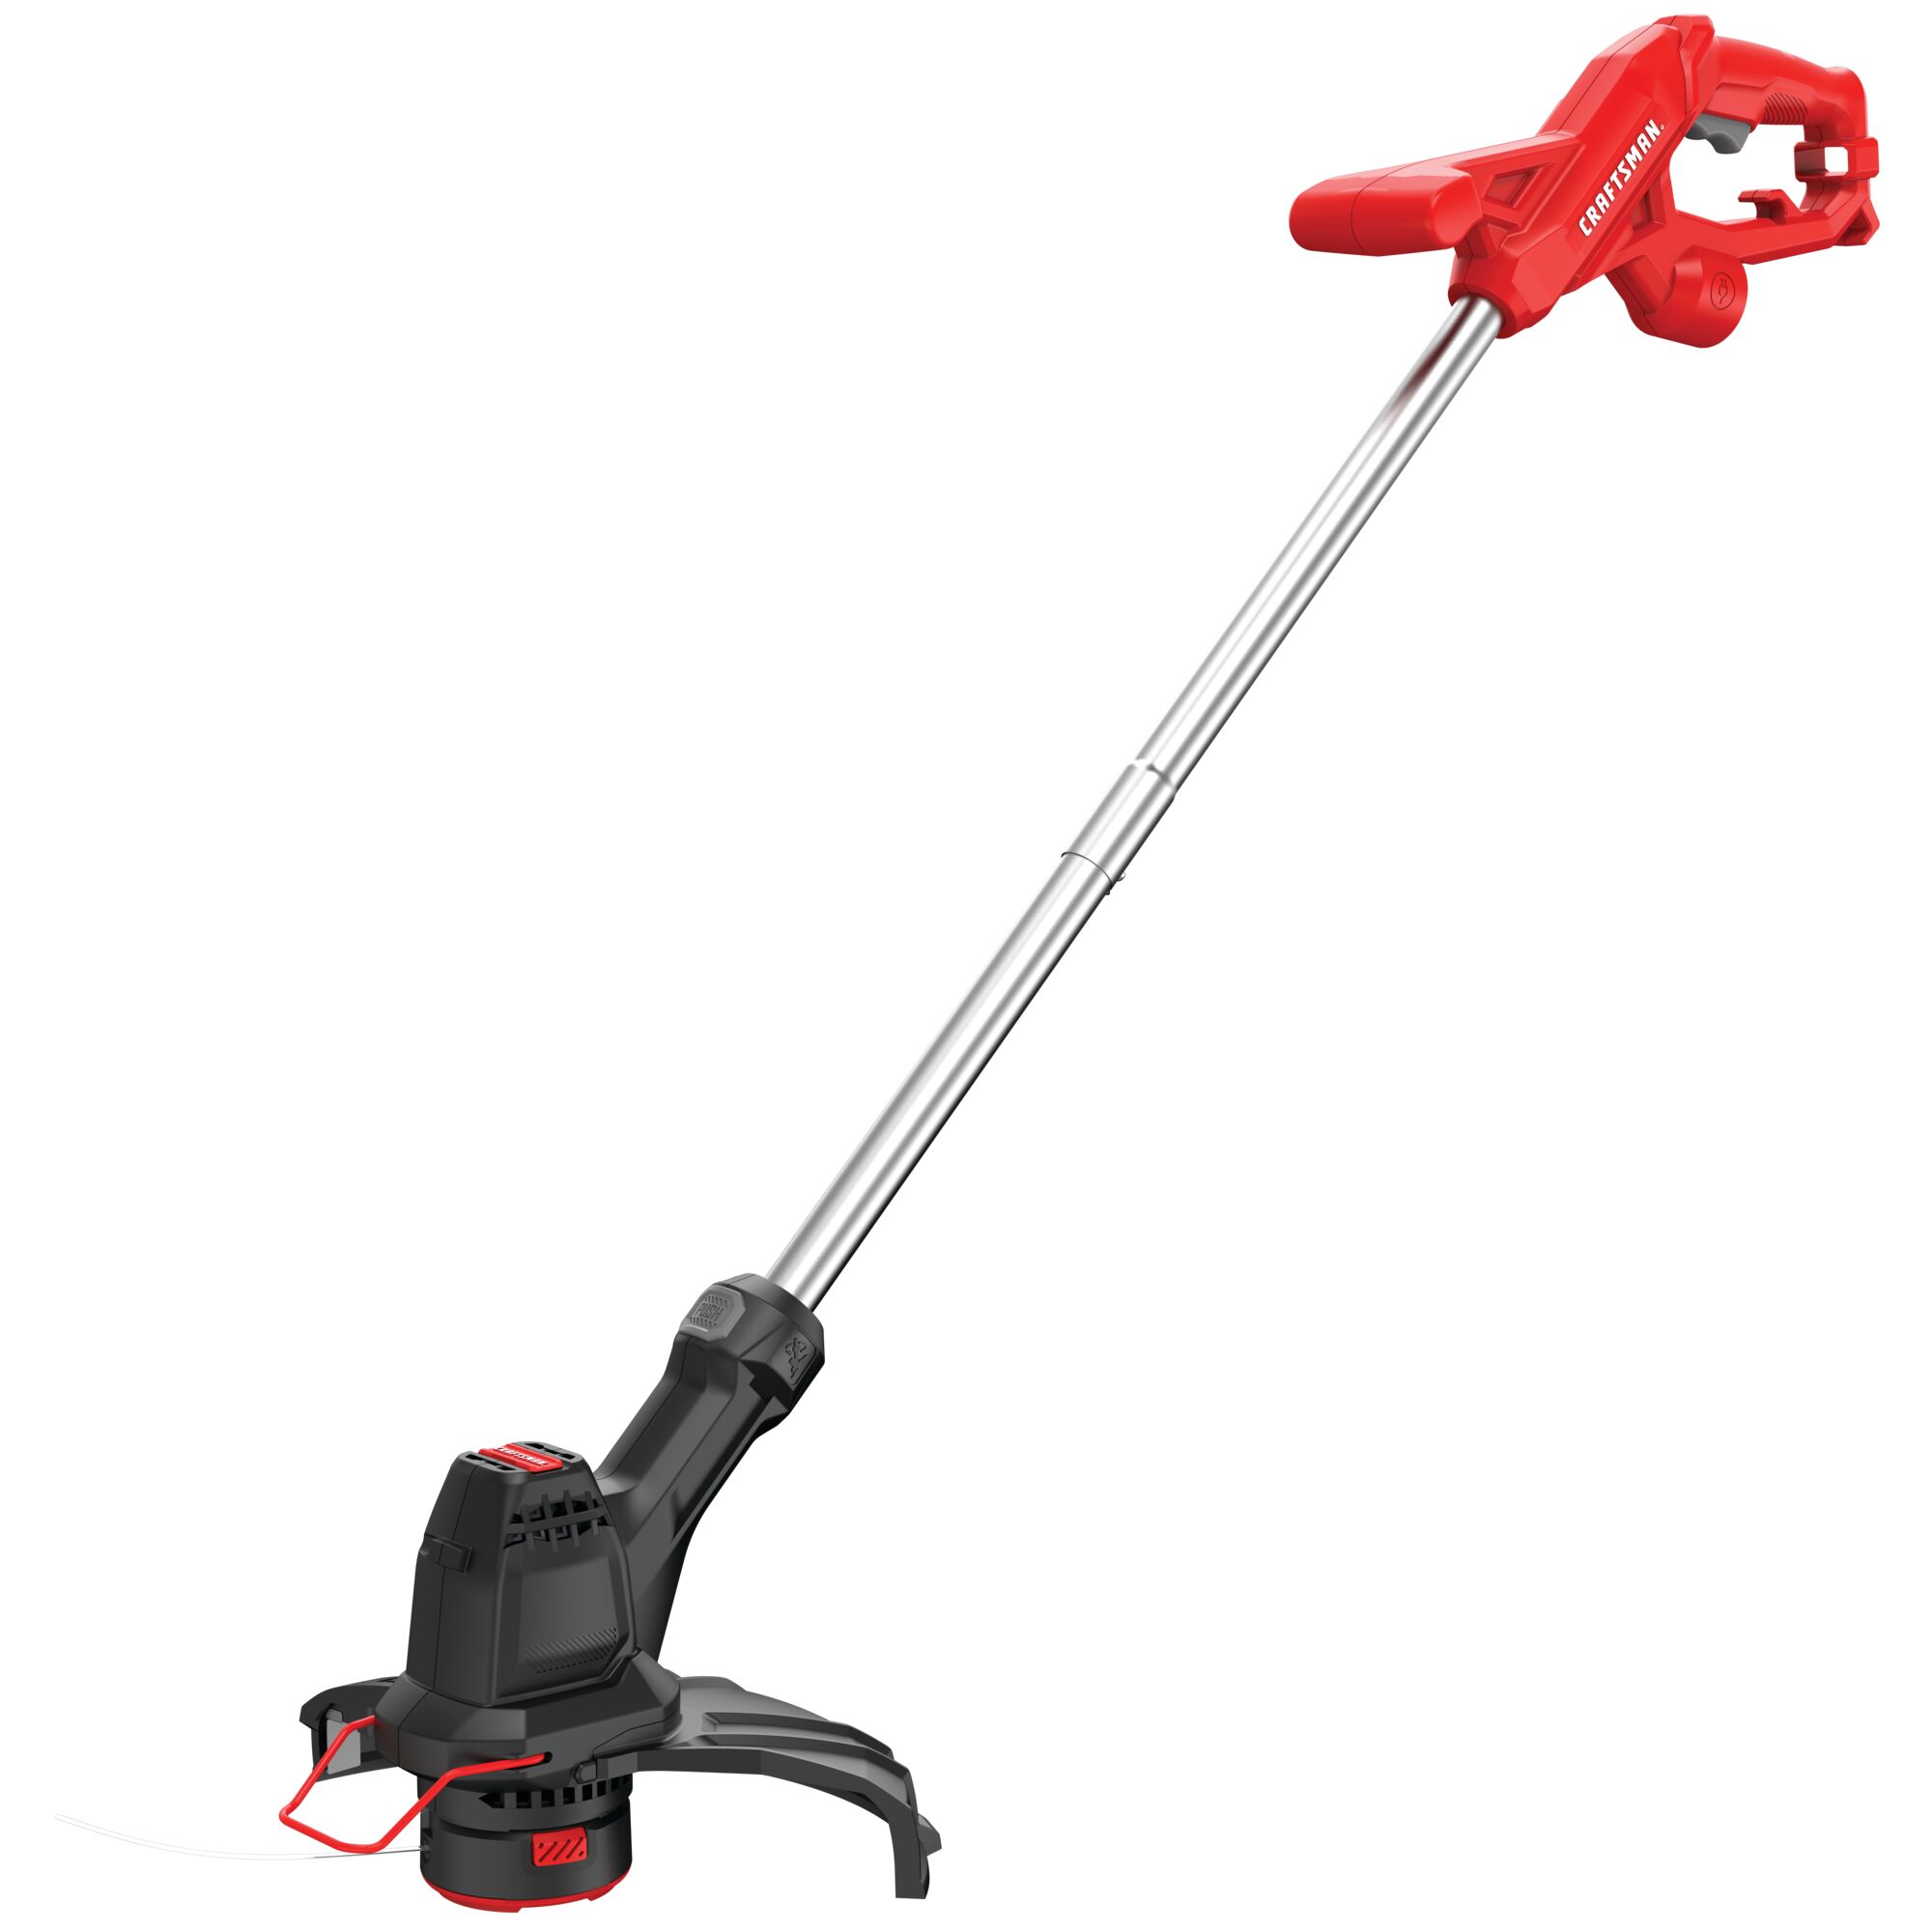 Profile of 3 dot 5 amp 12 inch corded string trimmer cum edger.